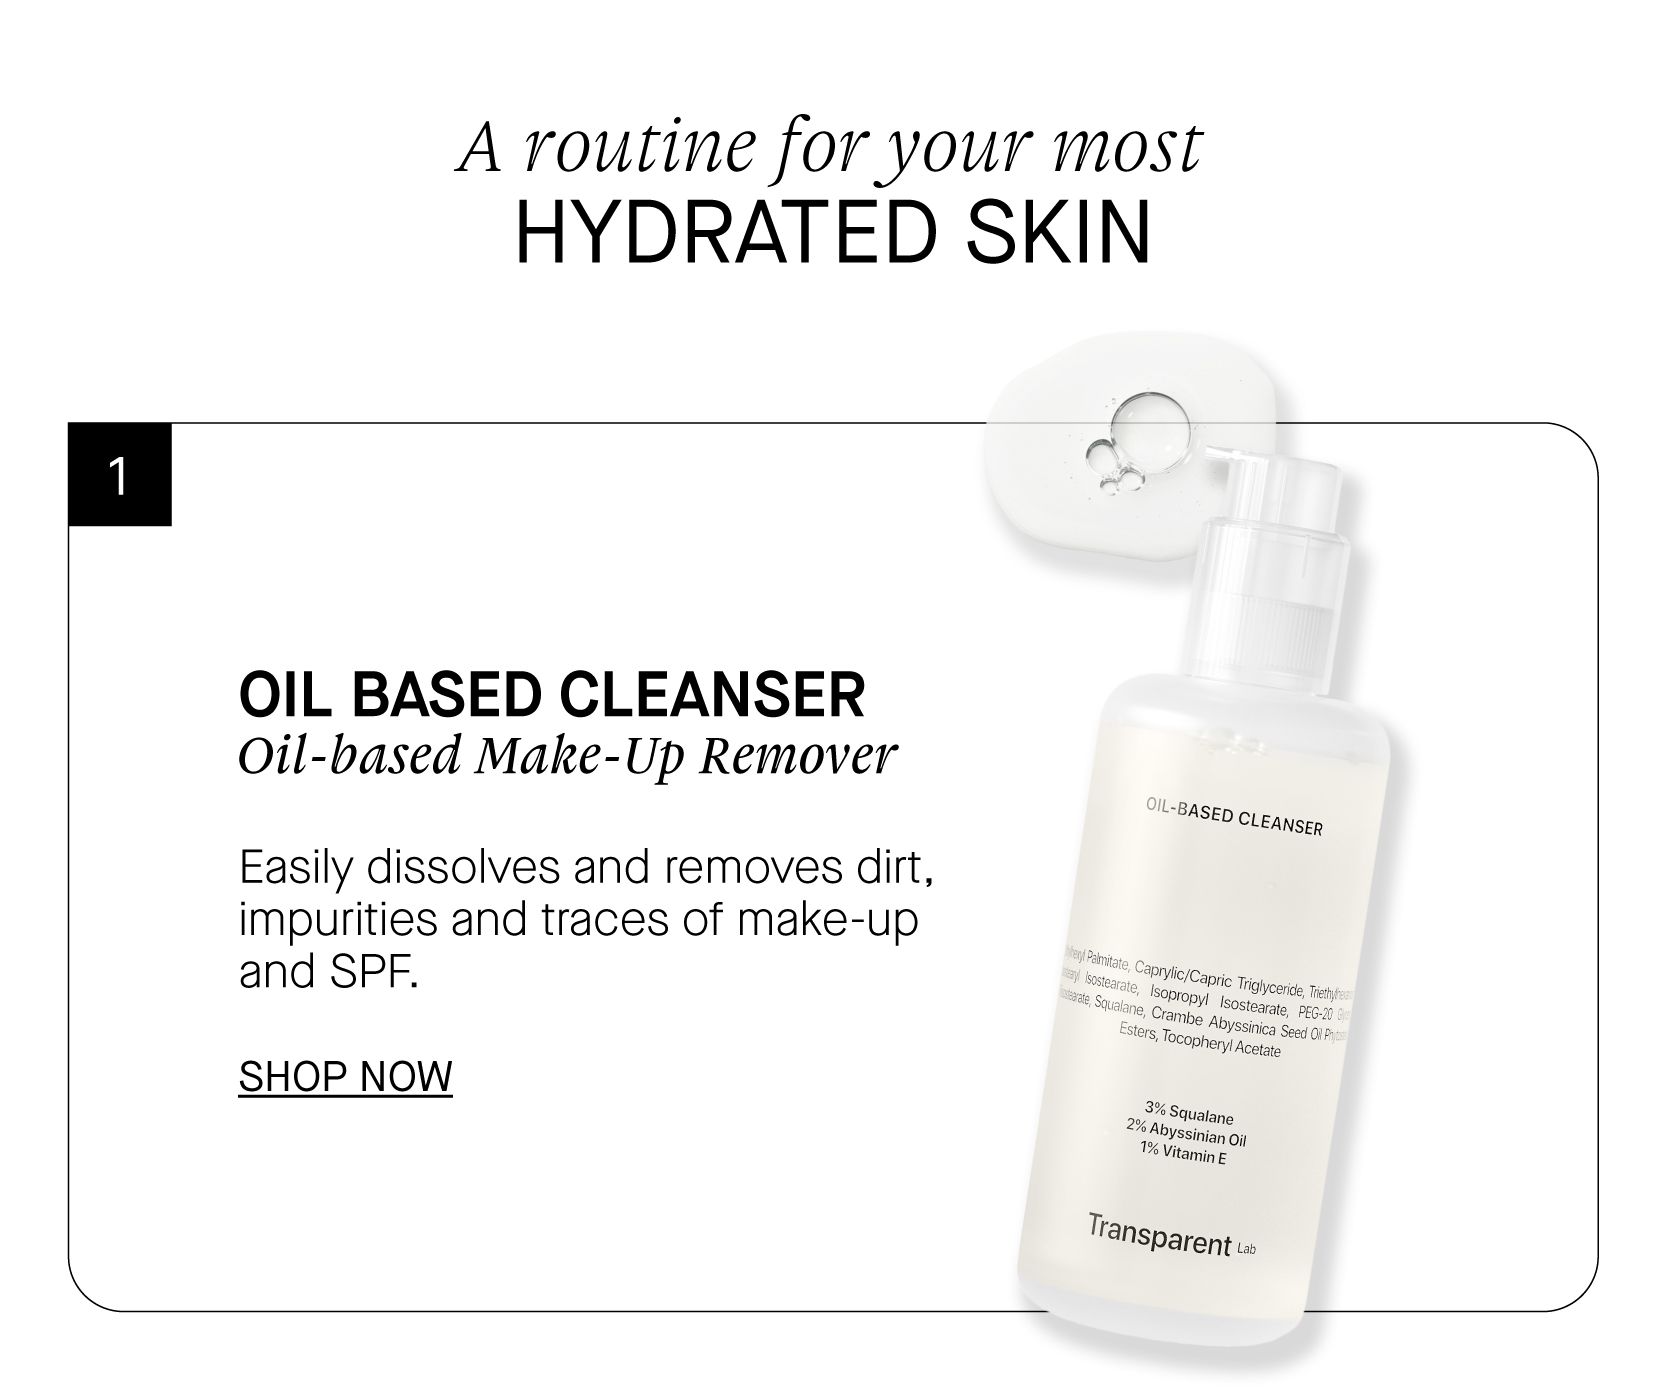 A routine for your most HYDRATED SKIN OIL BASED CLEANSER Oil-based Make-Up Remover Easily dissolves and removes dirt, impurities and traces of make-up and SPF. SHOP NOW L-BASEp CLEANSER 3%s, o, . SQUalane 2 Abyssinig 1% Vitamip Transpar ent ta 